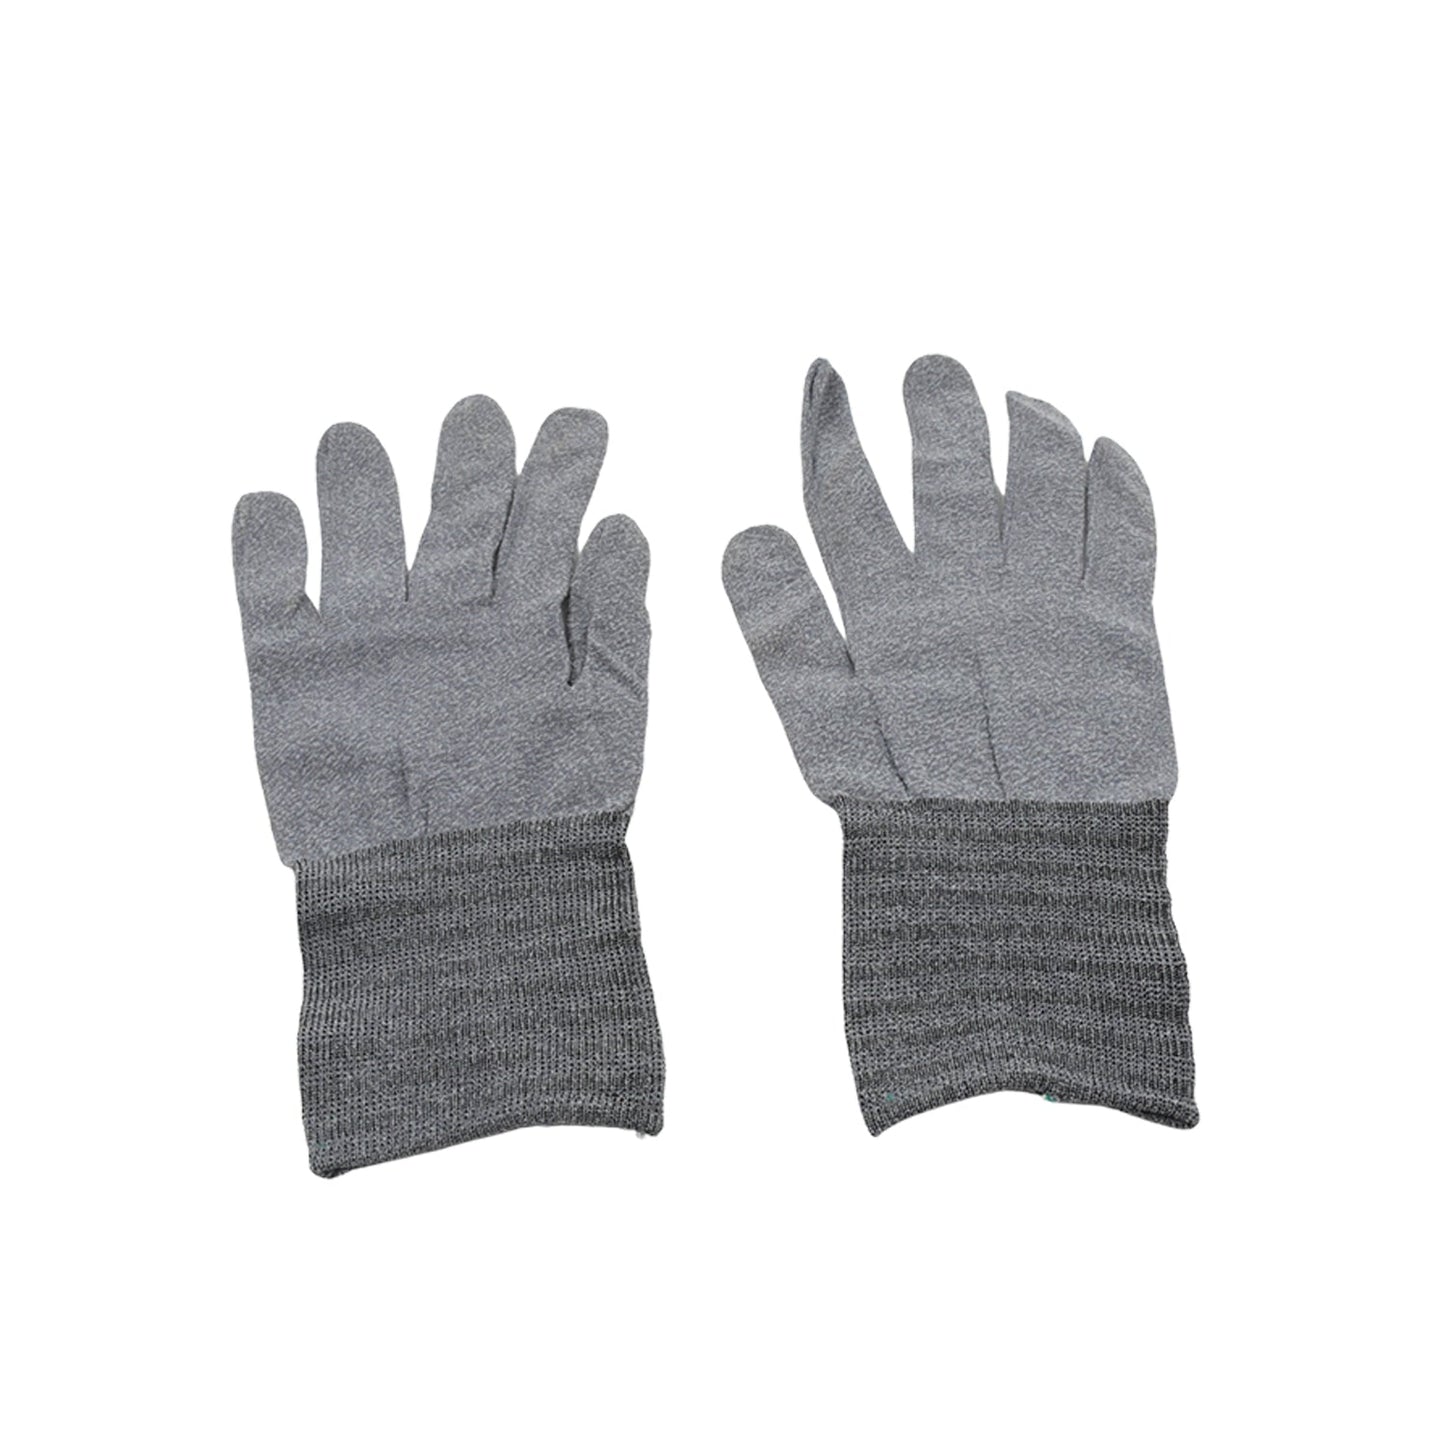 1 Pair Cut Resistant Gloves Anti Cut Gloves Heat Resistant Kint Safety Work Gloves High Performance Protection, Food Grade Bbq